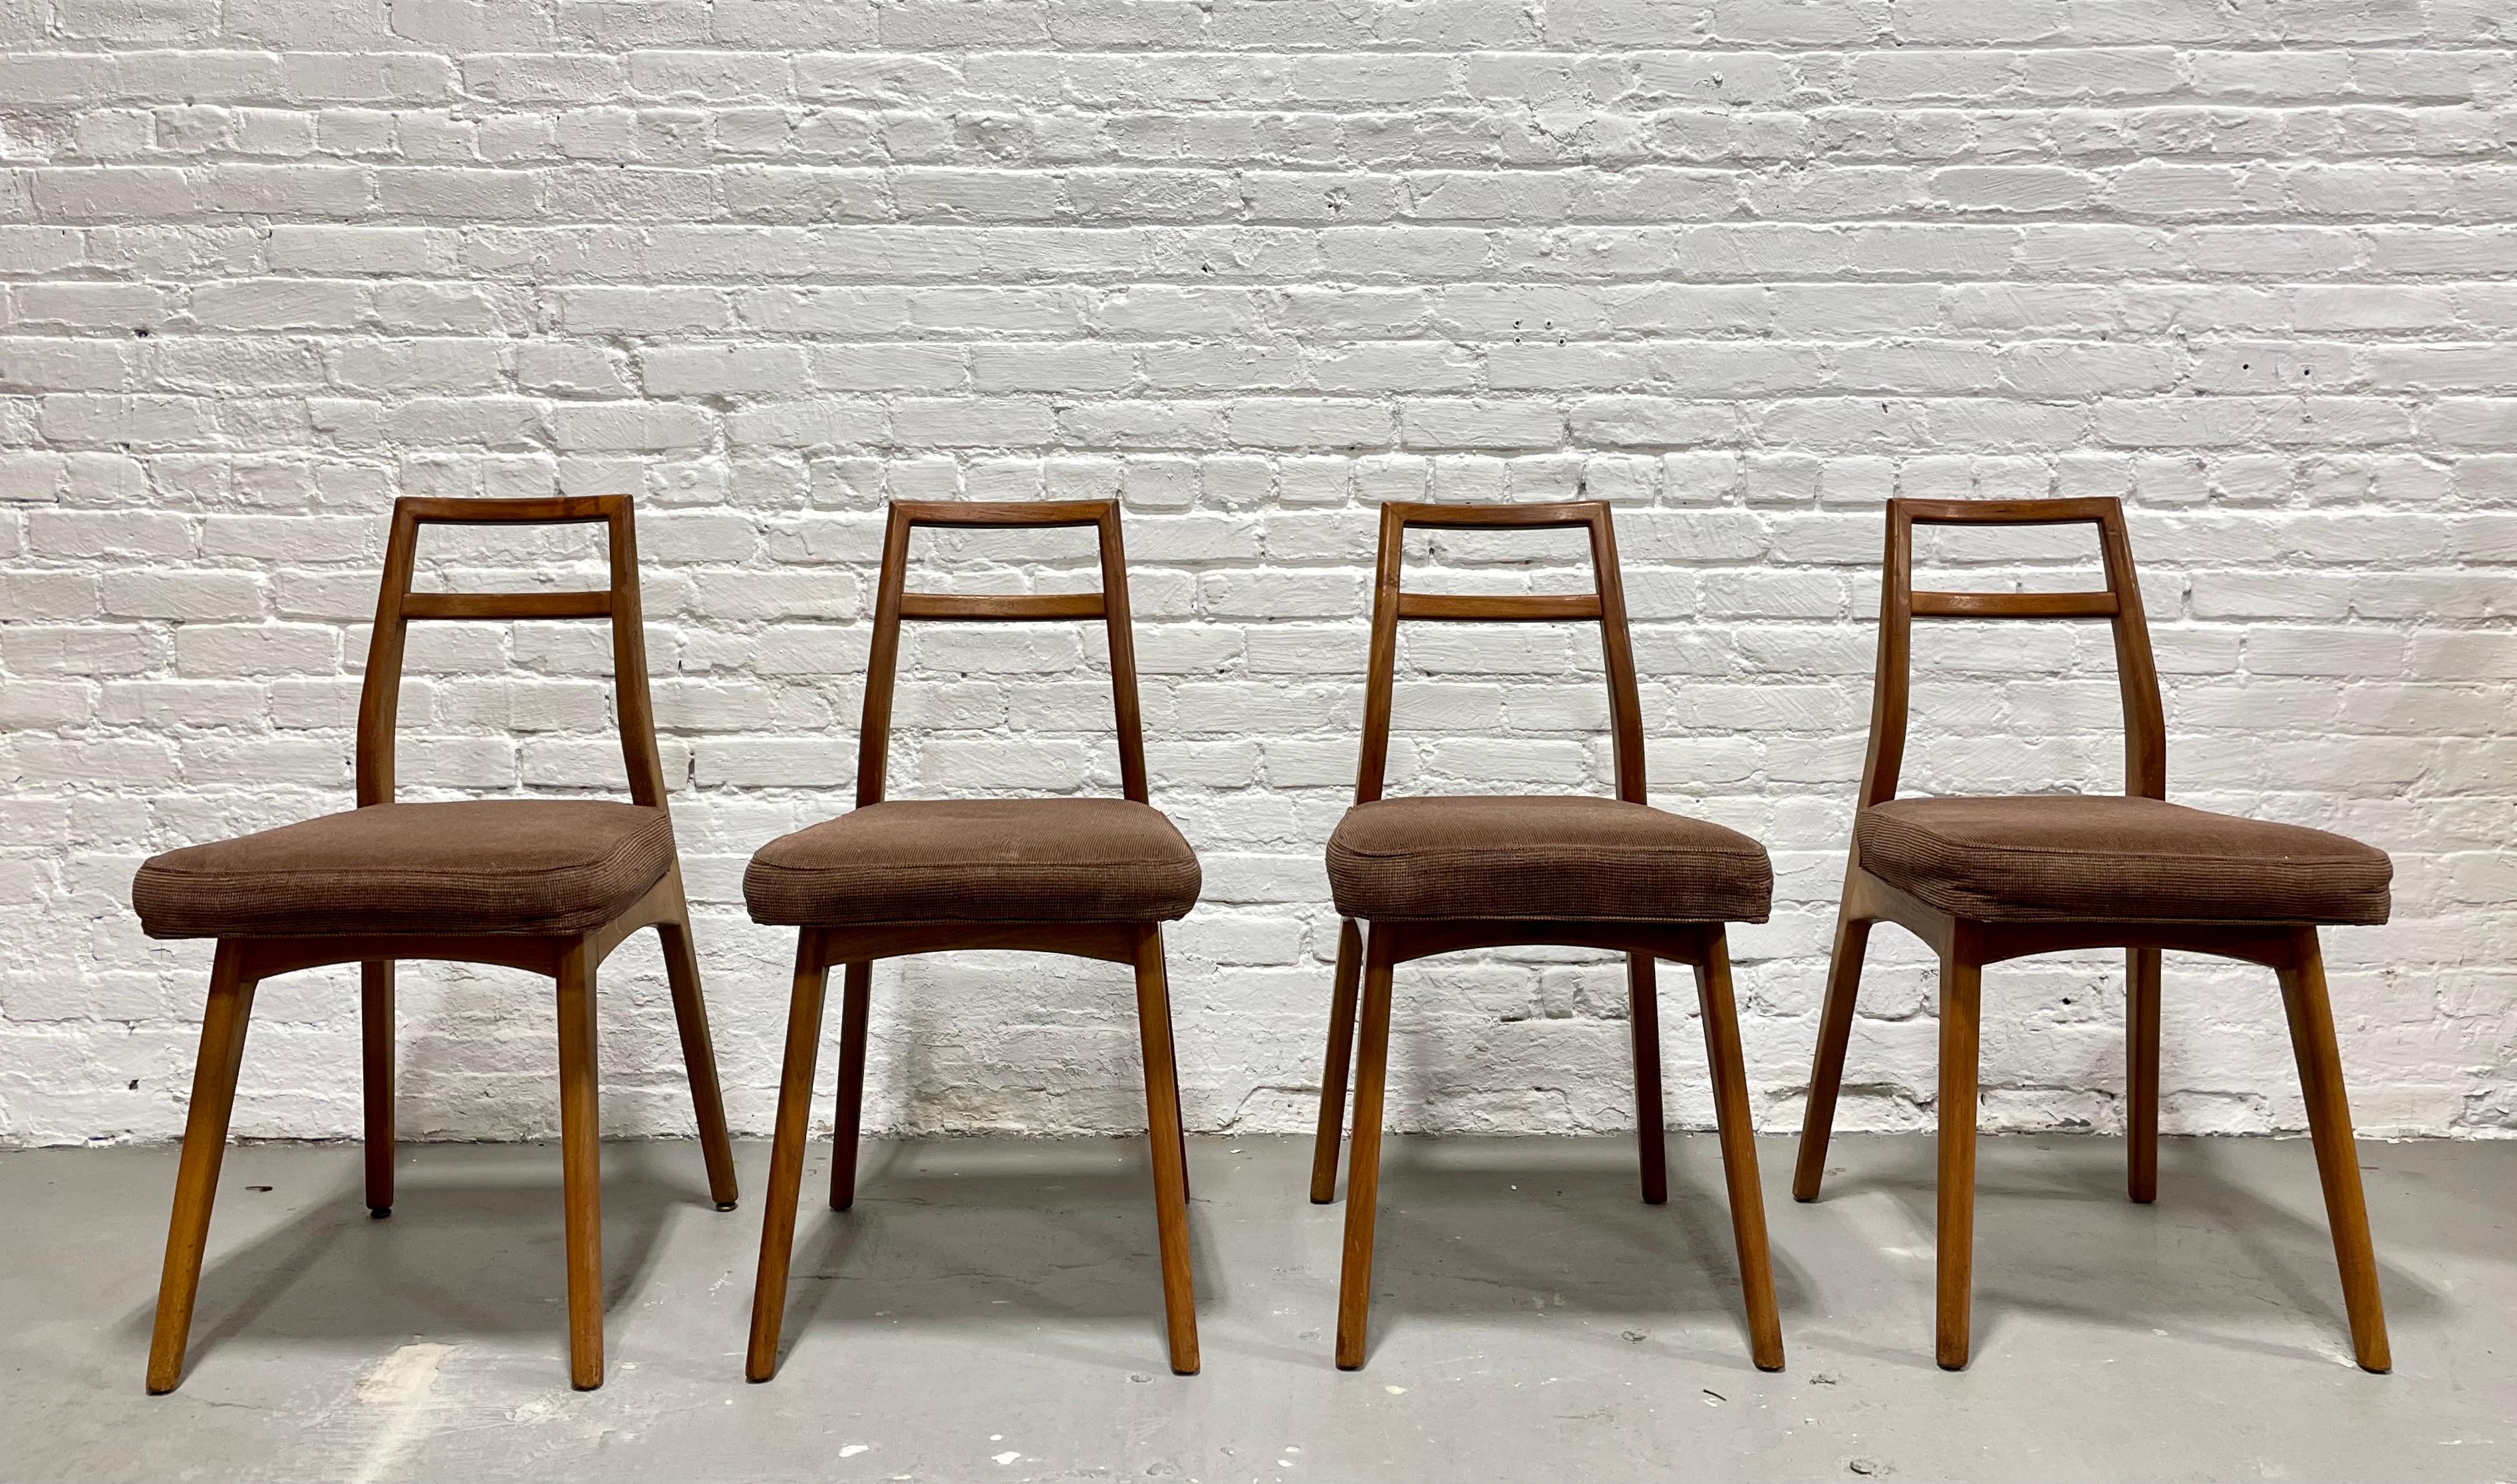 Mid-Century Modern dining chairs by Mel Smilow, set of four. Frames feature lovely sculptural backrests and floating seats. Floating seat design adds an air of lightness and elegance to the frame. The chairs have been cleaned and oiled and the brown